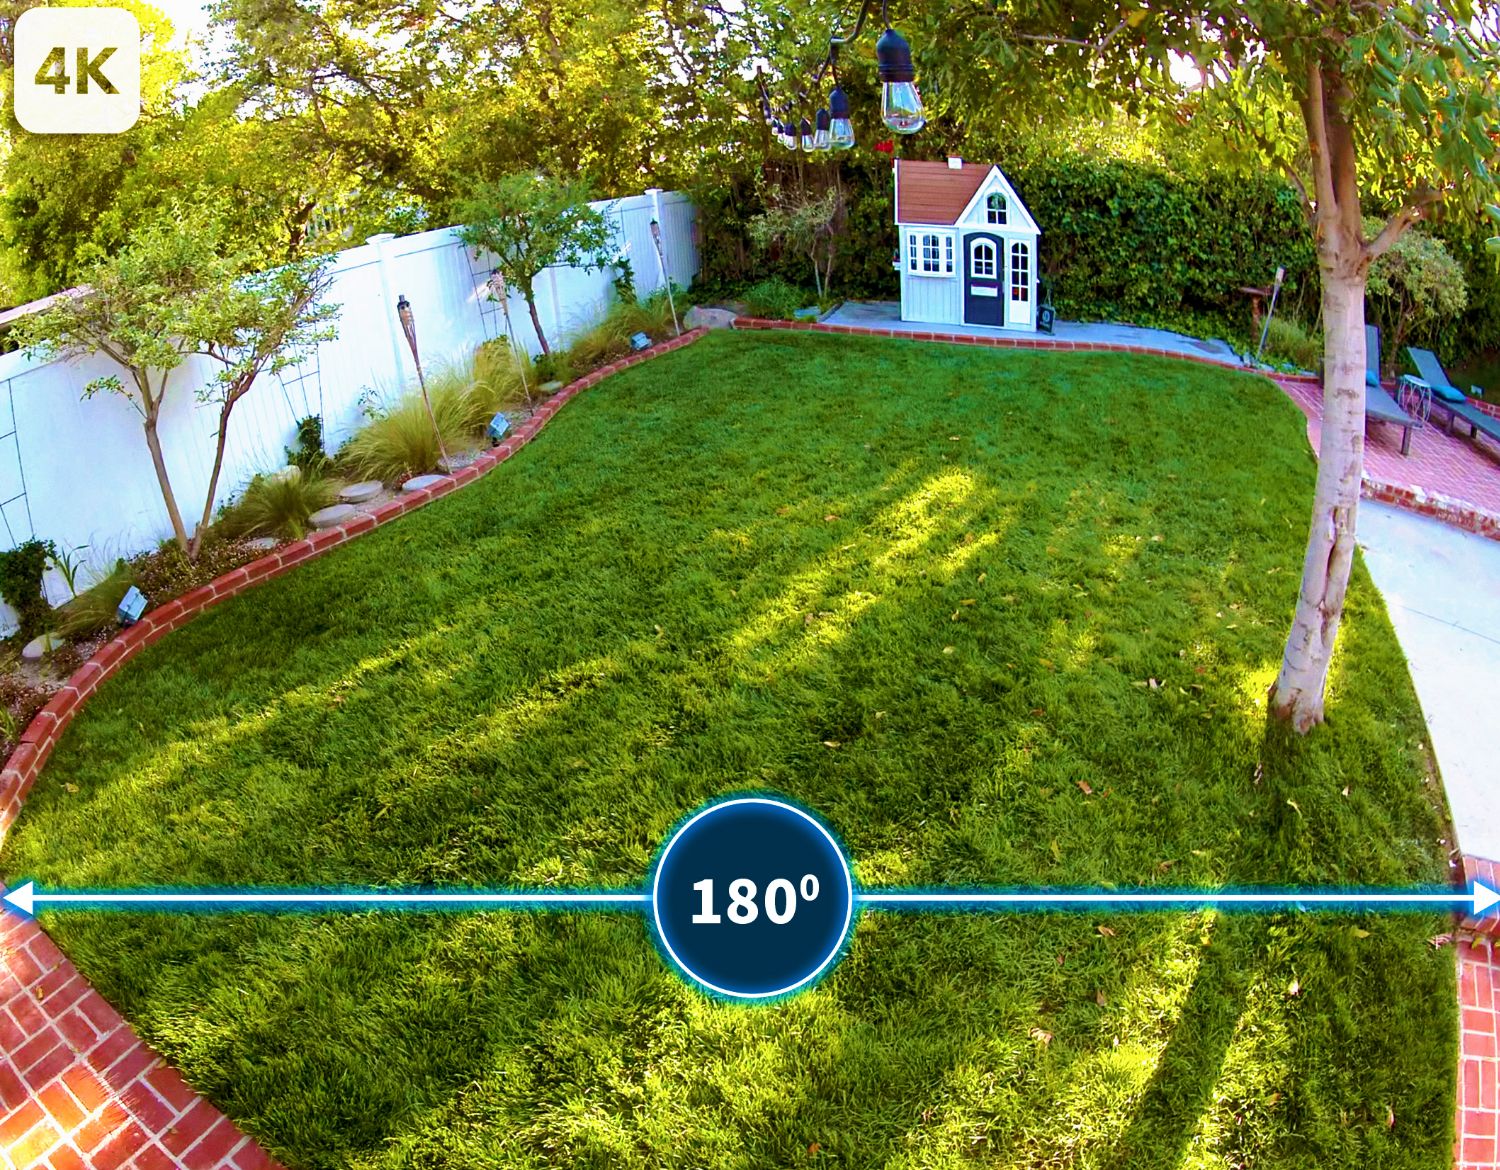 An image illustrates the 180° field of view of the Arlo Ultra 2 XL security camera